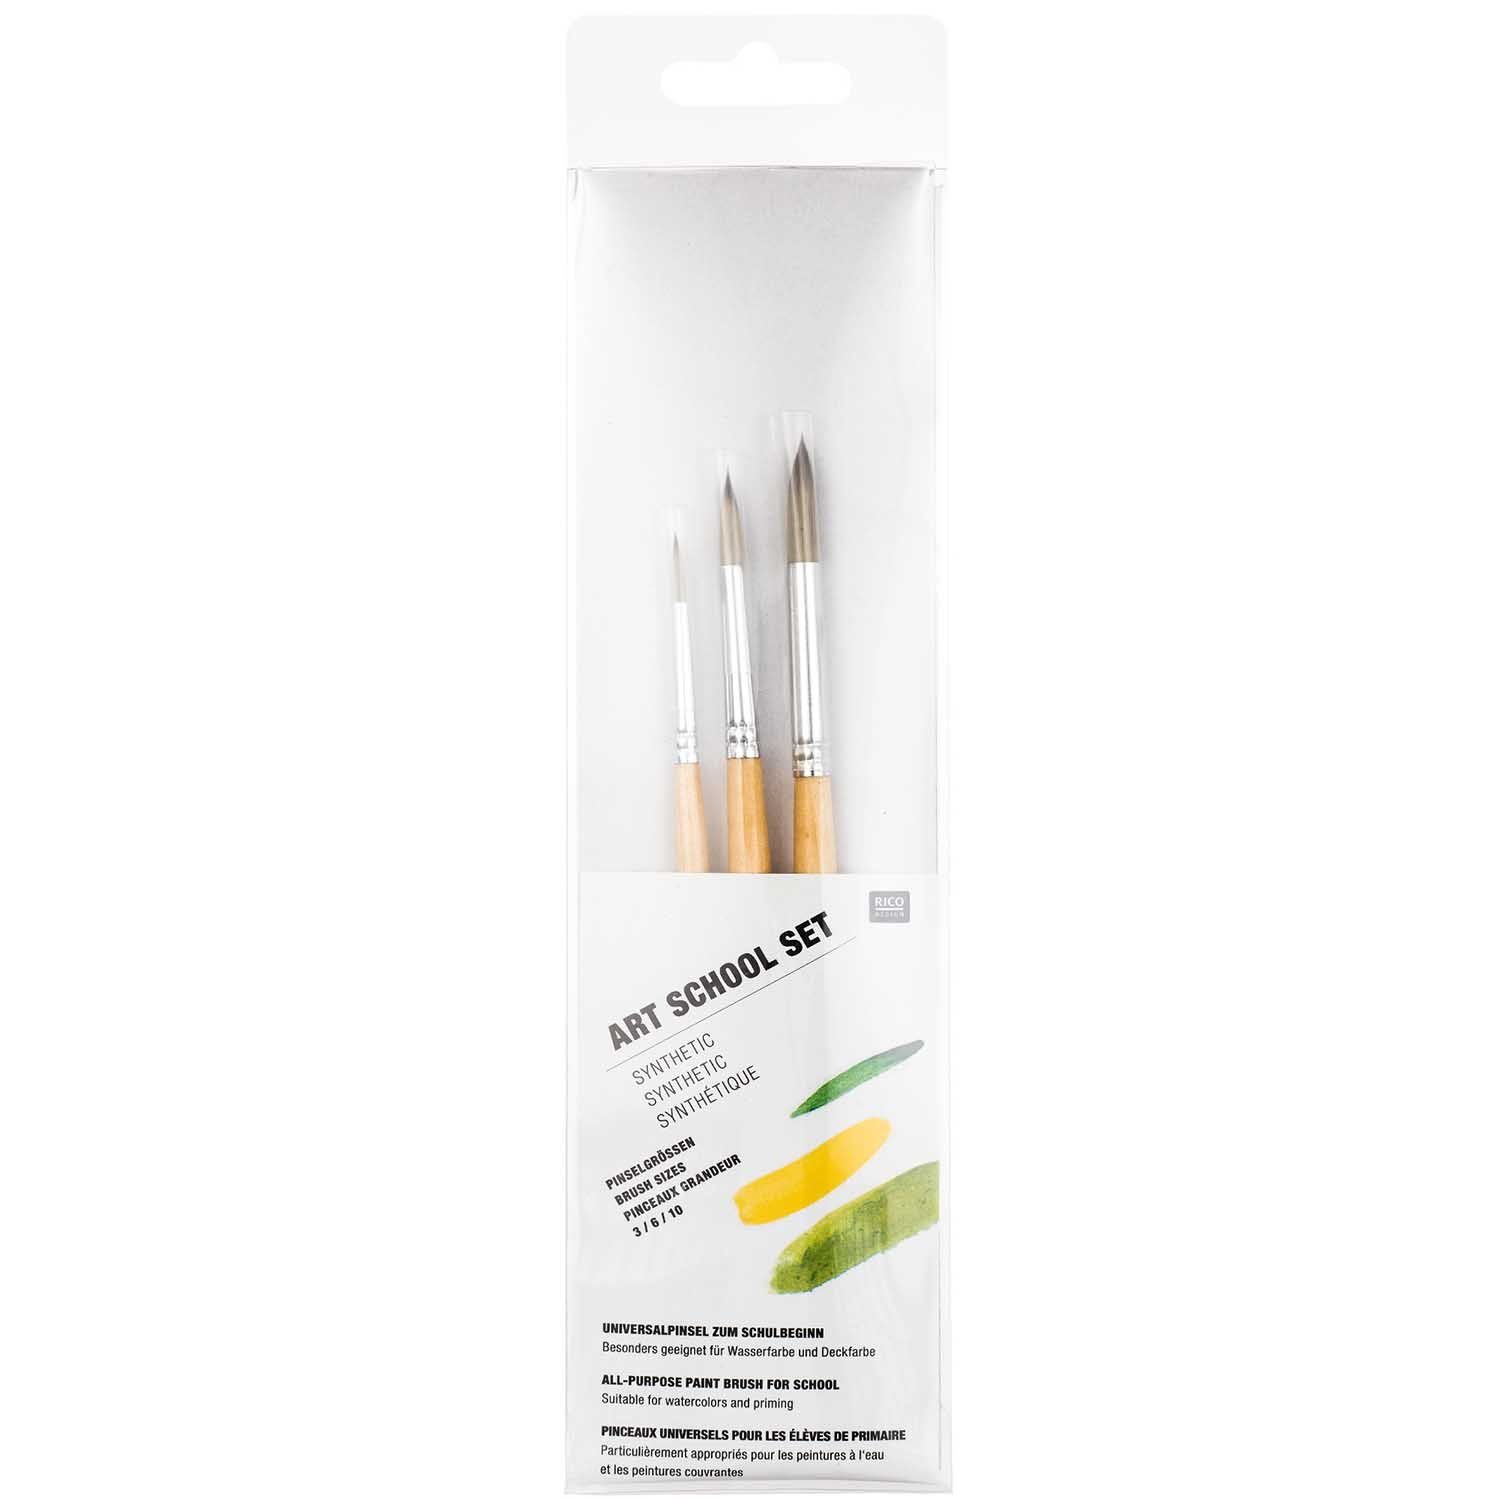 Pinsel (3 3teilig, Synthetic Design Set Pinsel Rico College teilig)